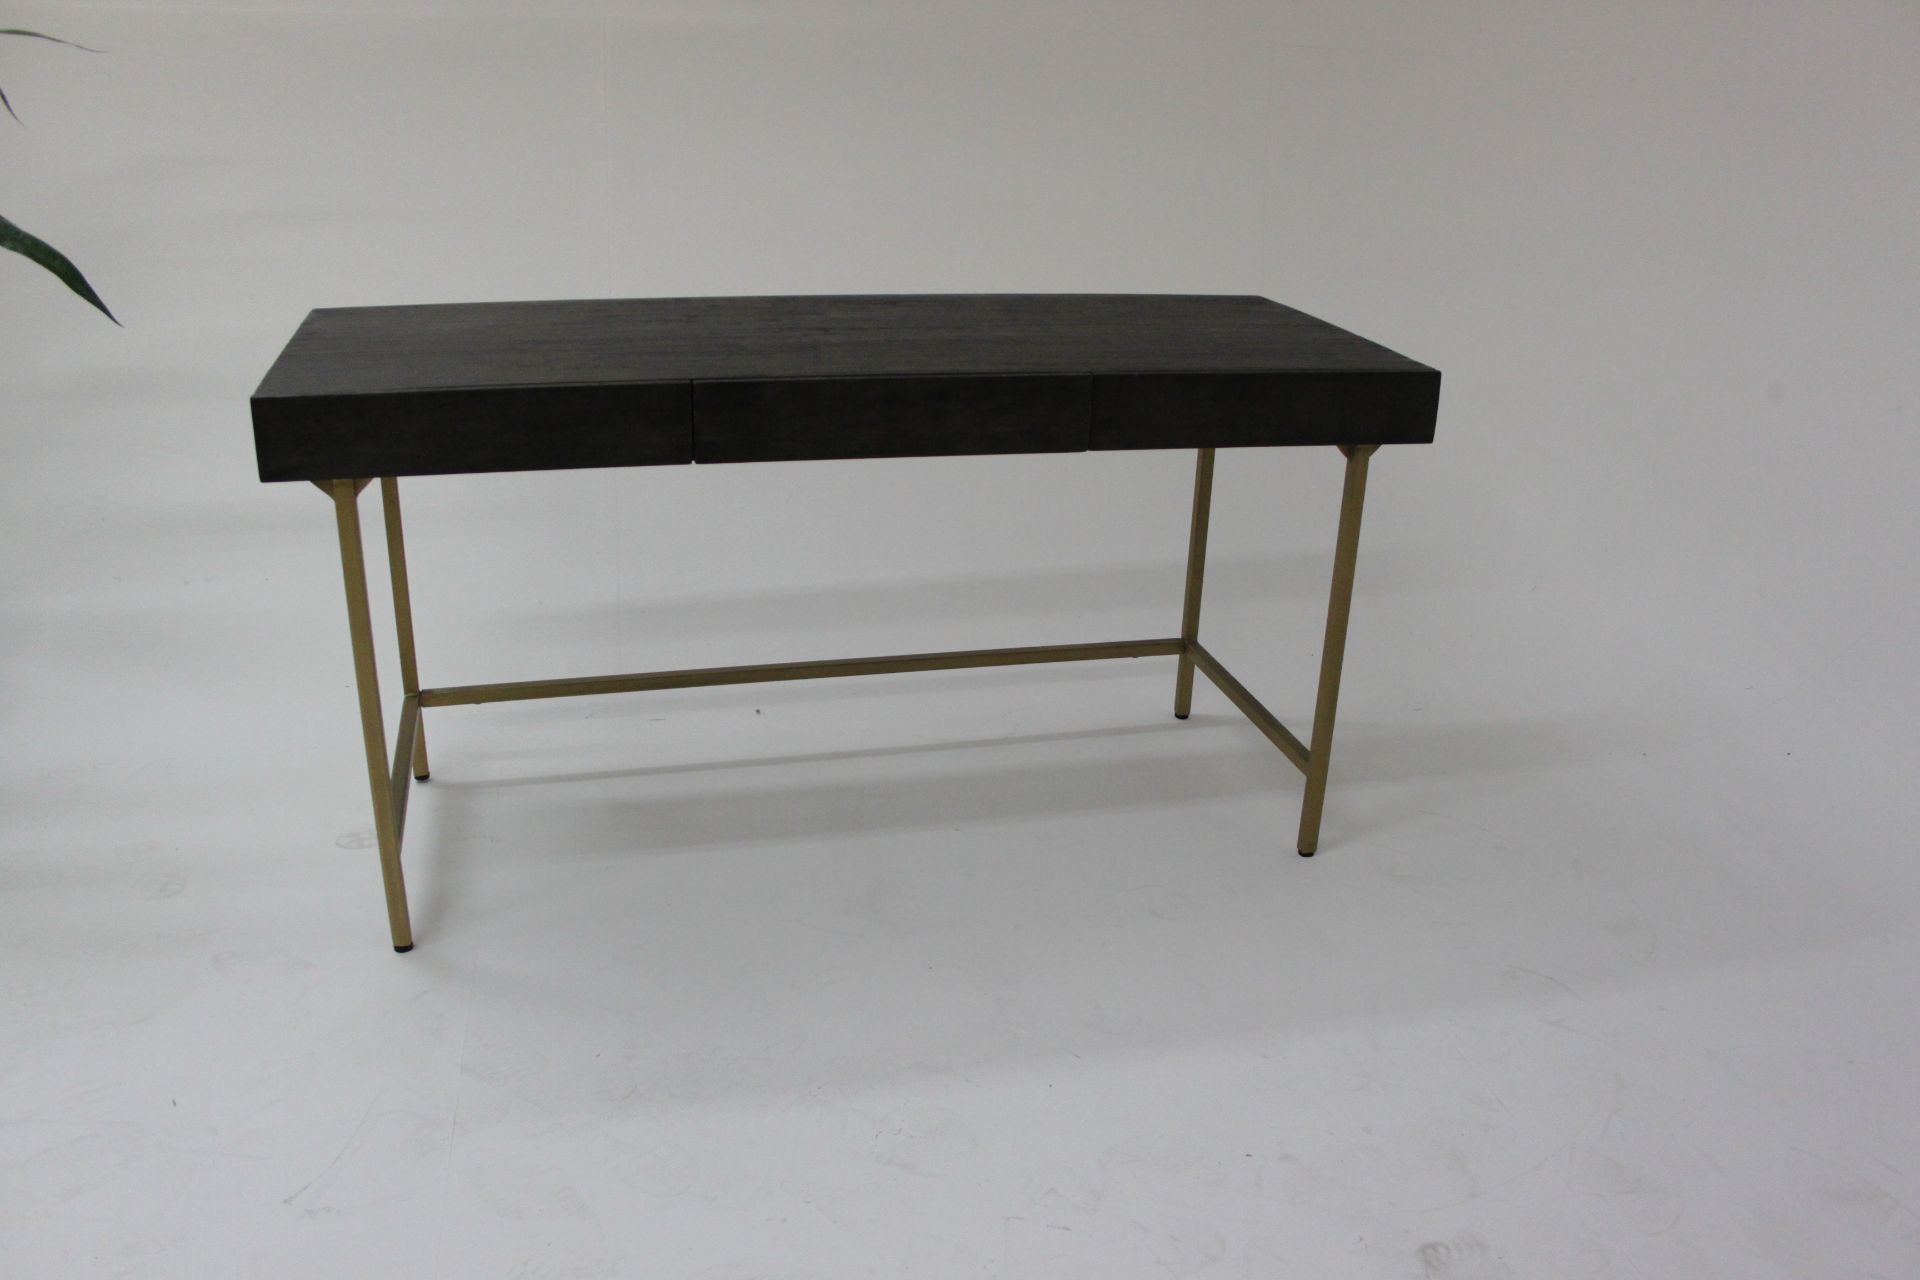 Gatsby Desk Black And Gold A Stunning Art Deco Inspired Piece That Just Looks Fantastic 153 X 61 X